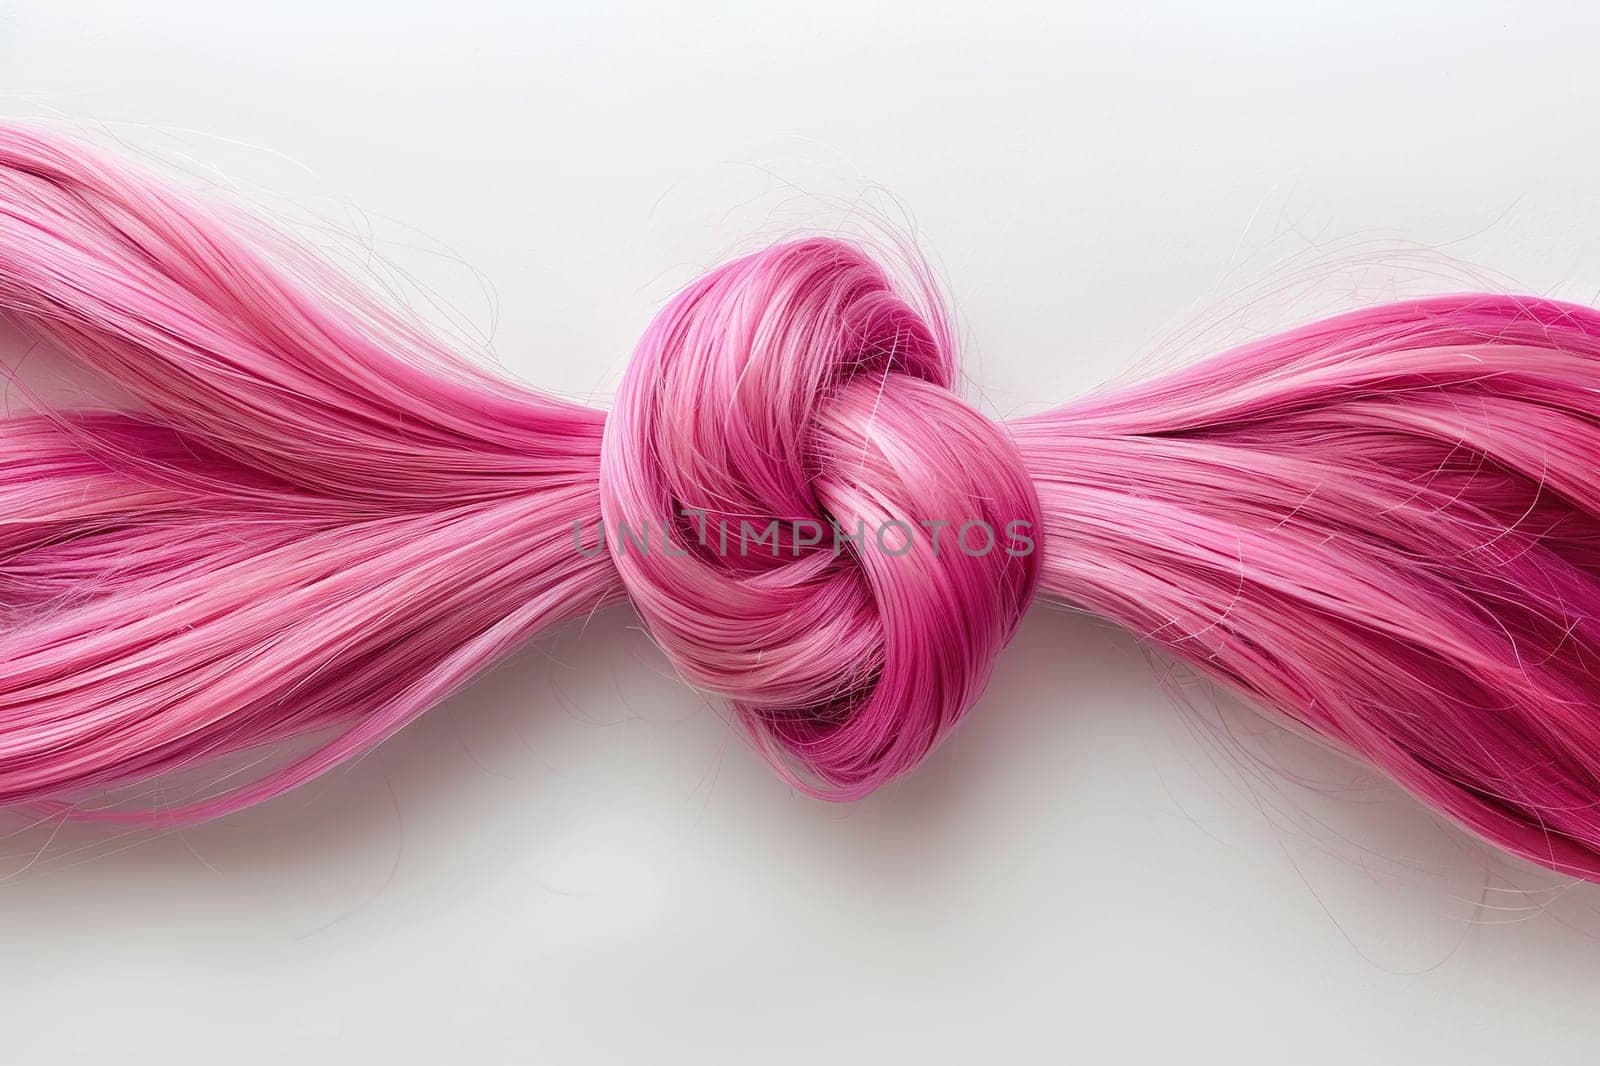 Beautiful strong shiny pink hair tied in a knot. The concept of hairdressing services for health improvement and hair coloring.